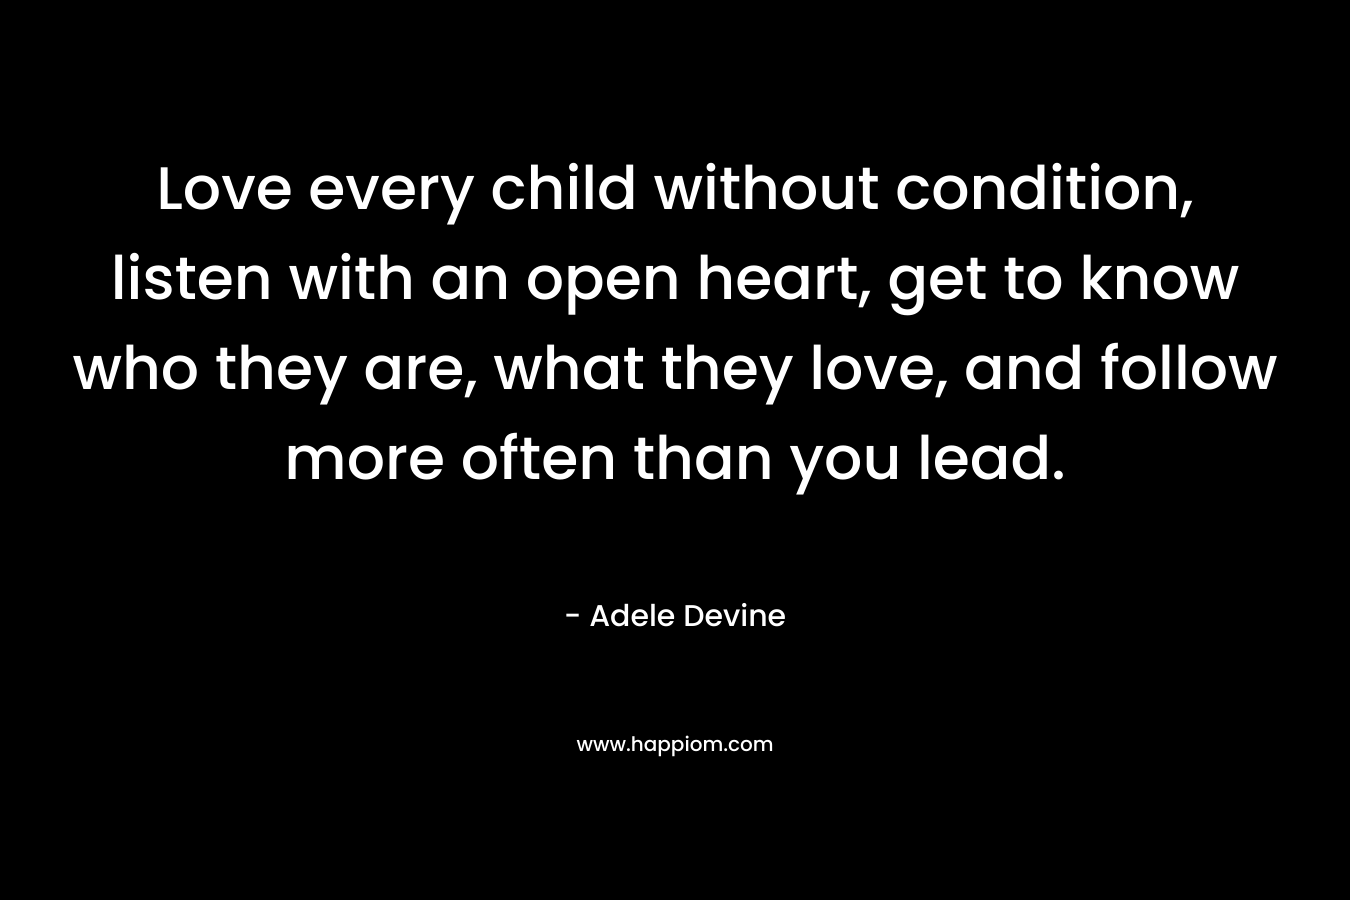 Love every child without condition, listen with an open heart, get to know who they are, what they love, and follow more often than you lead.